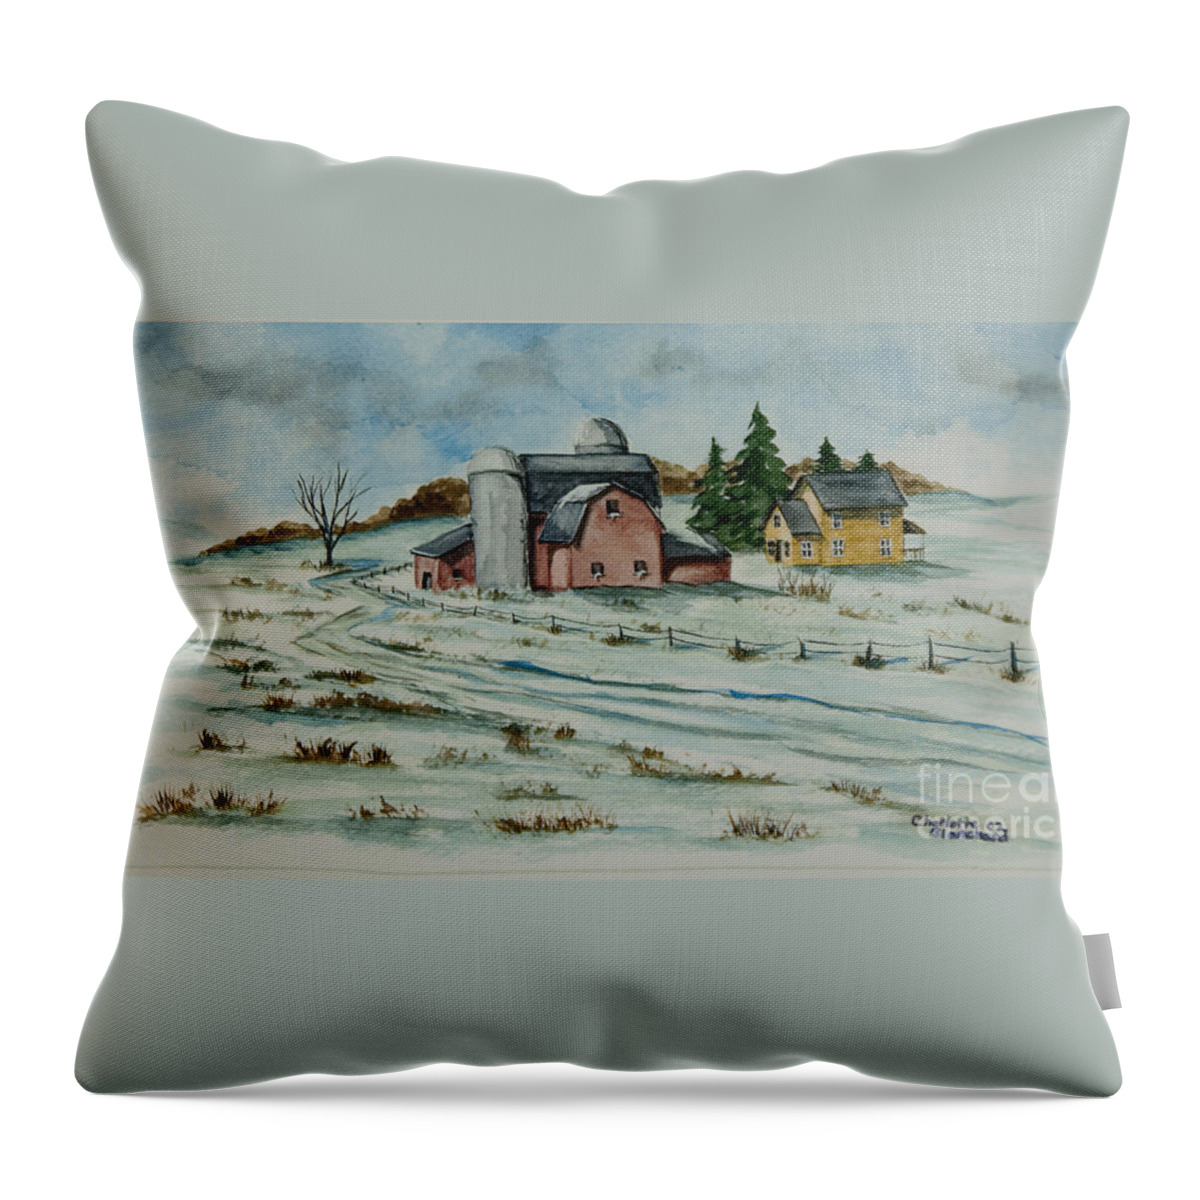 Winter Scene Paintings Throw Pillow featuring the painting Winter Down On The Farm by Charlotte Blanchard